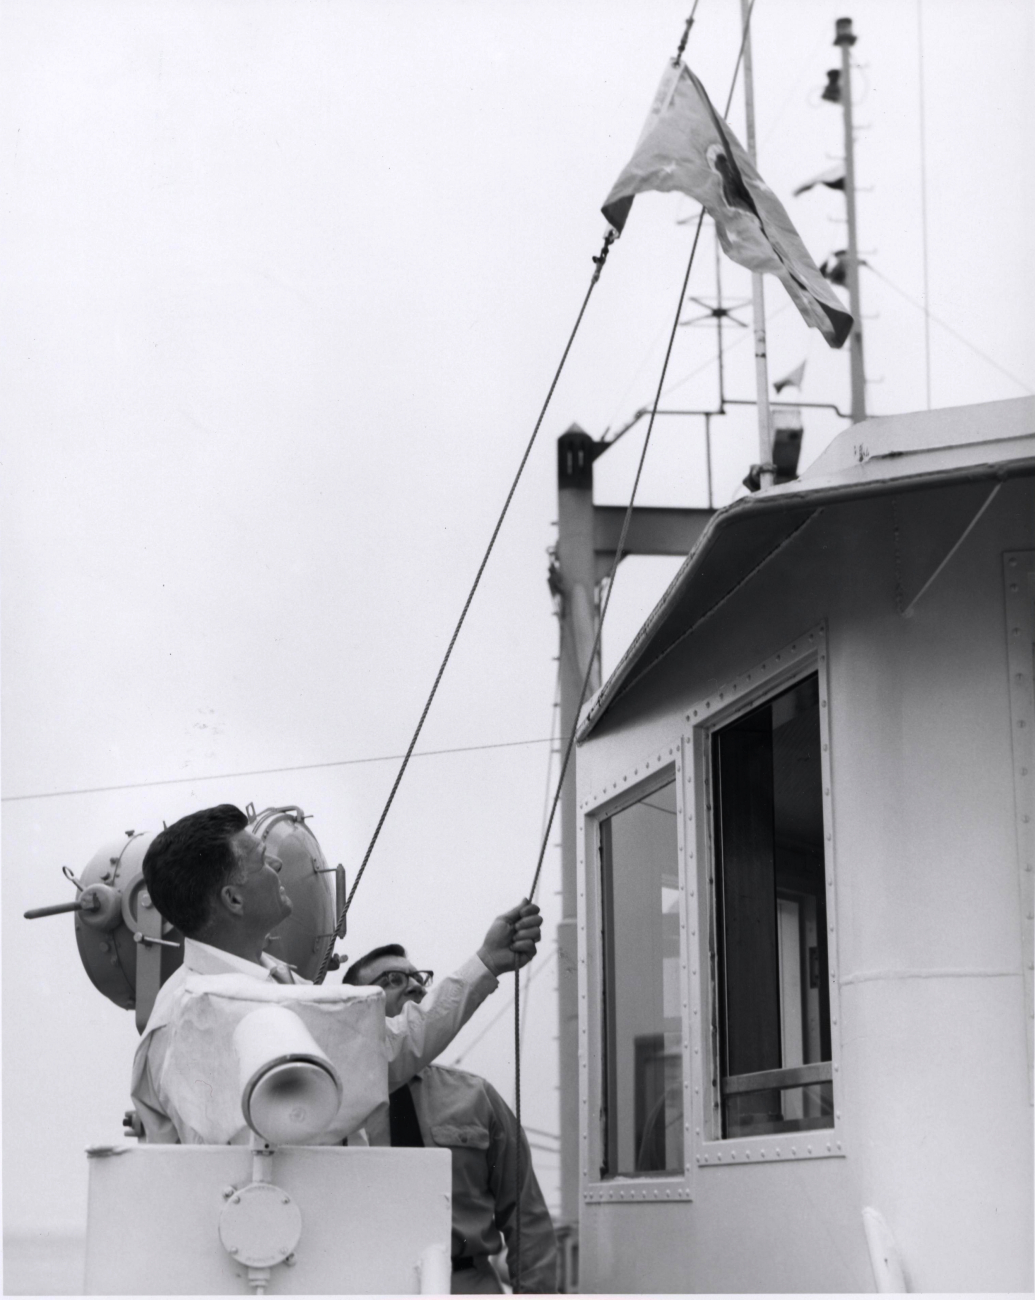 Raising the official flag of the Department of the Interior during dedicationceremonies on the ALBATROSS IV